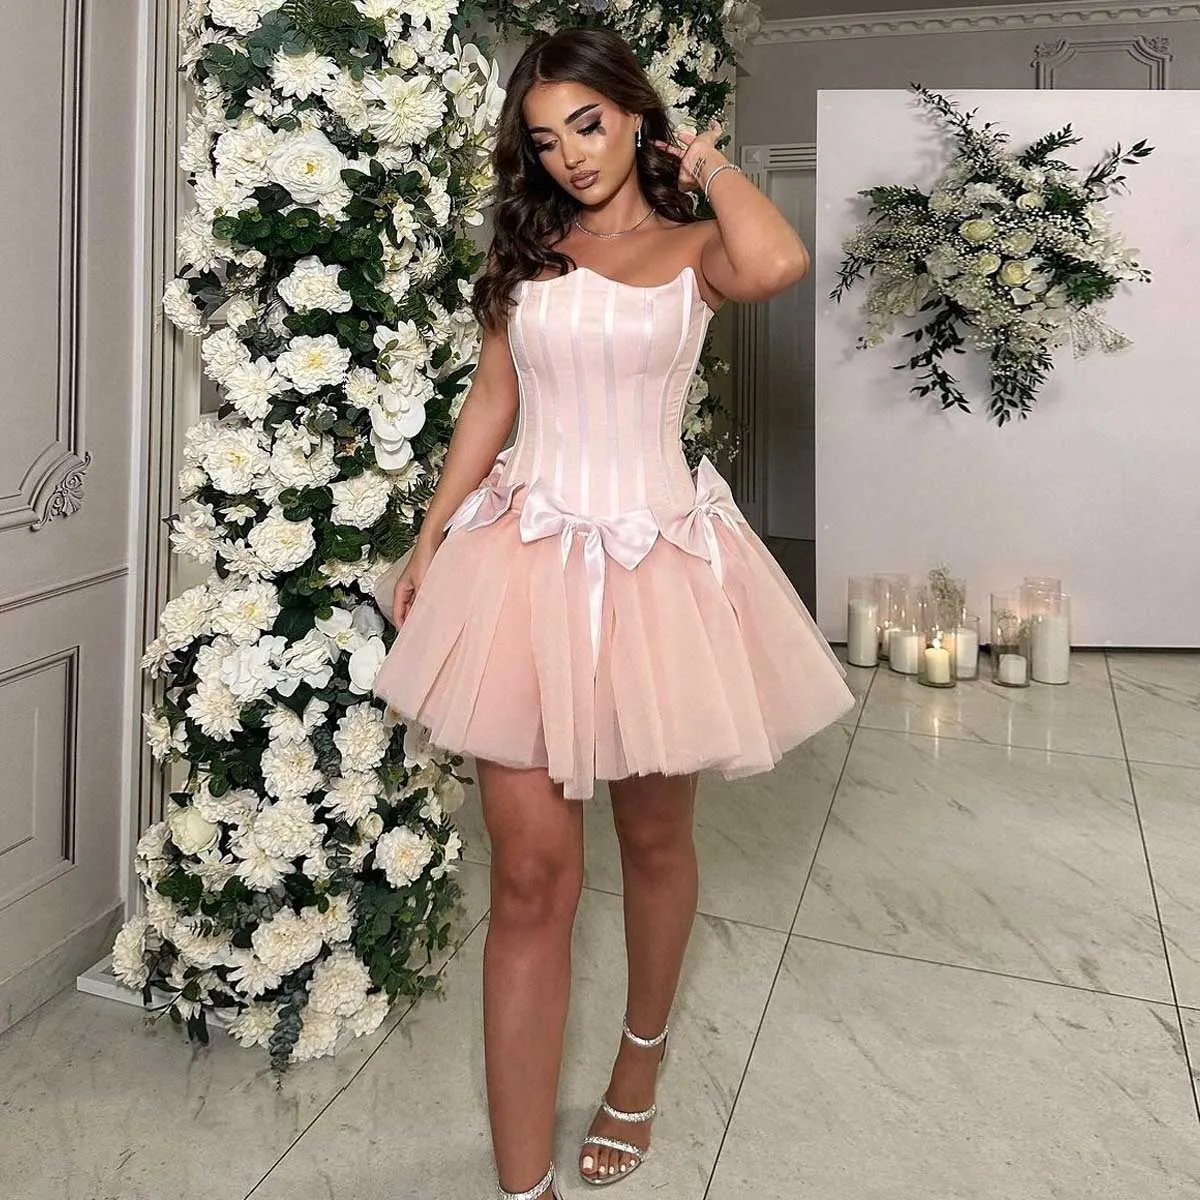 

Blush Pink Short Party Dresses with Cute Bows Silk Satin Tulle Women Birthday Dress Corset Short Homecoming Gown Formal Dress